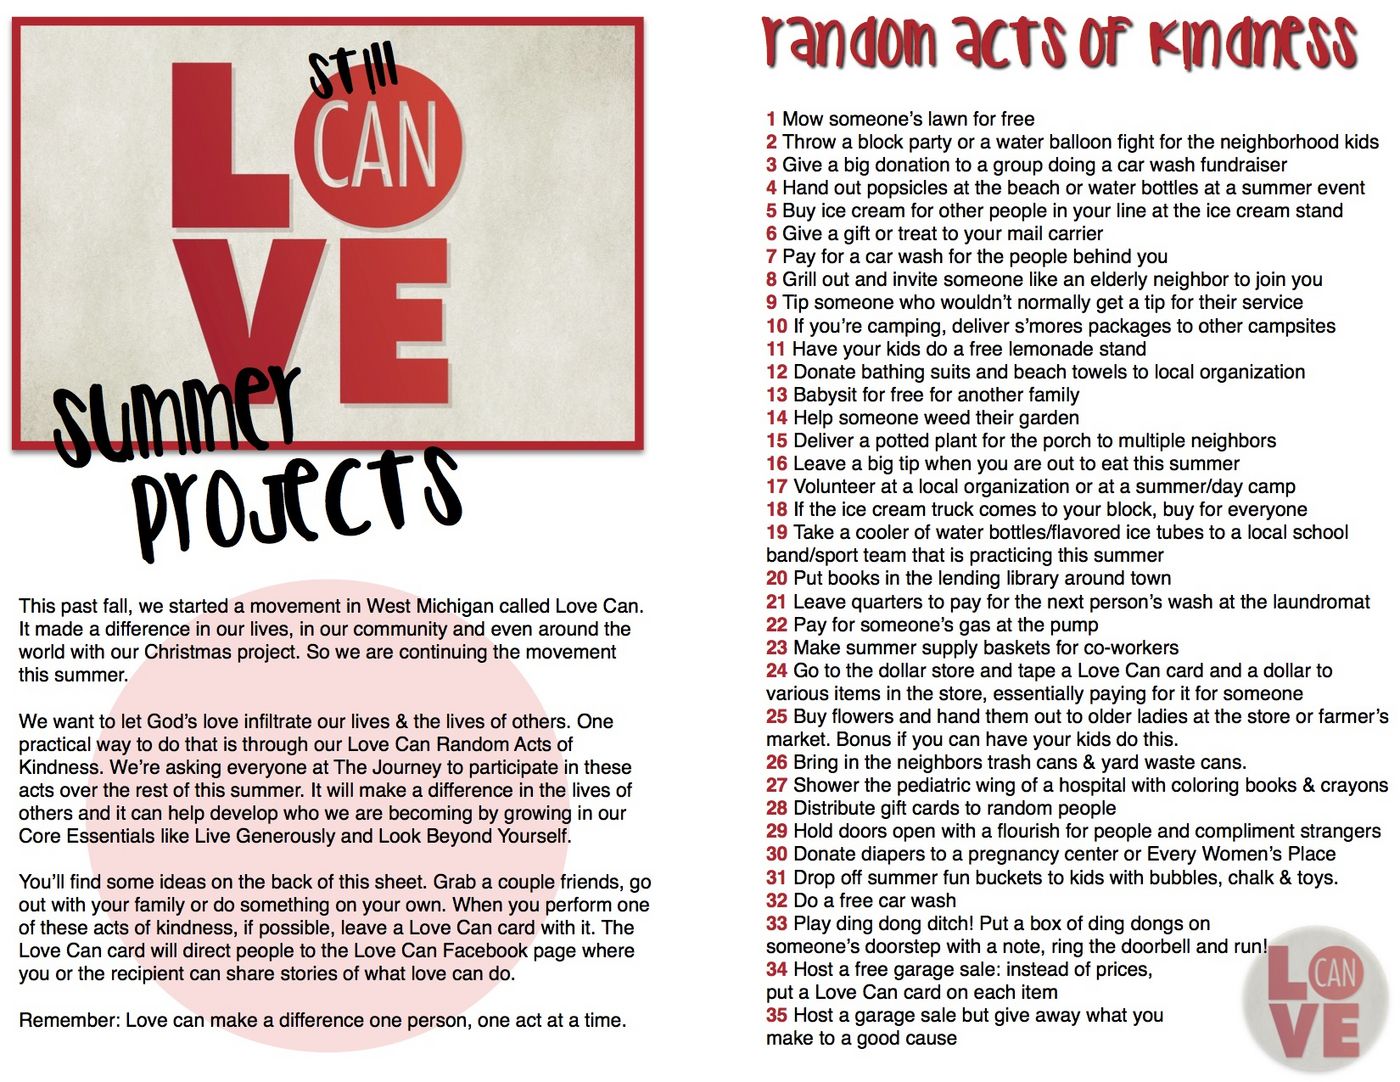 Love Can Summer Projects pic